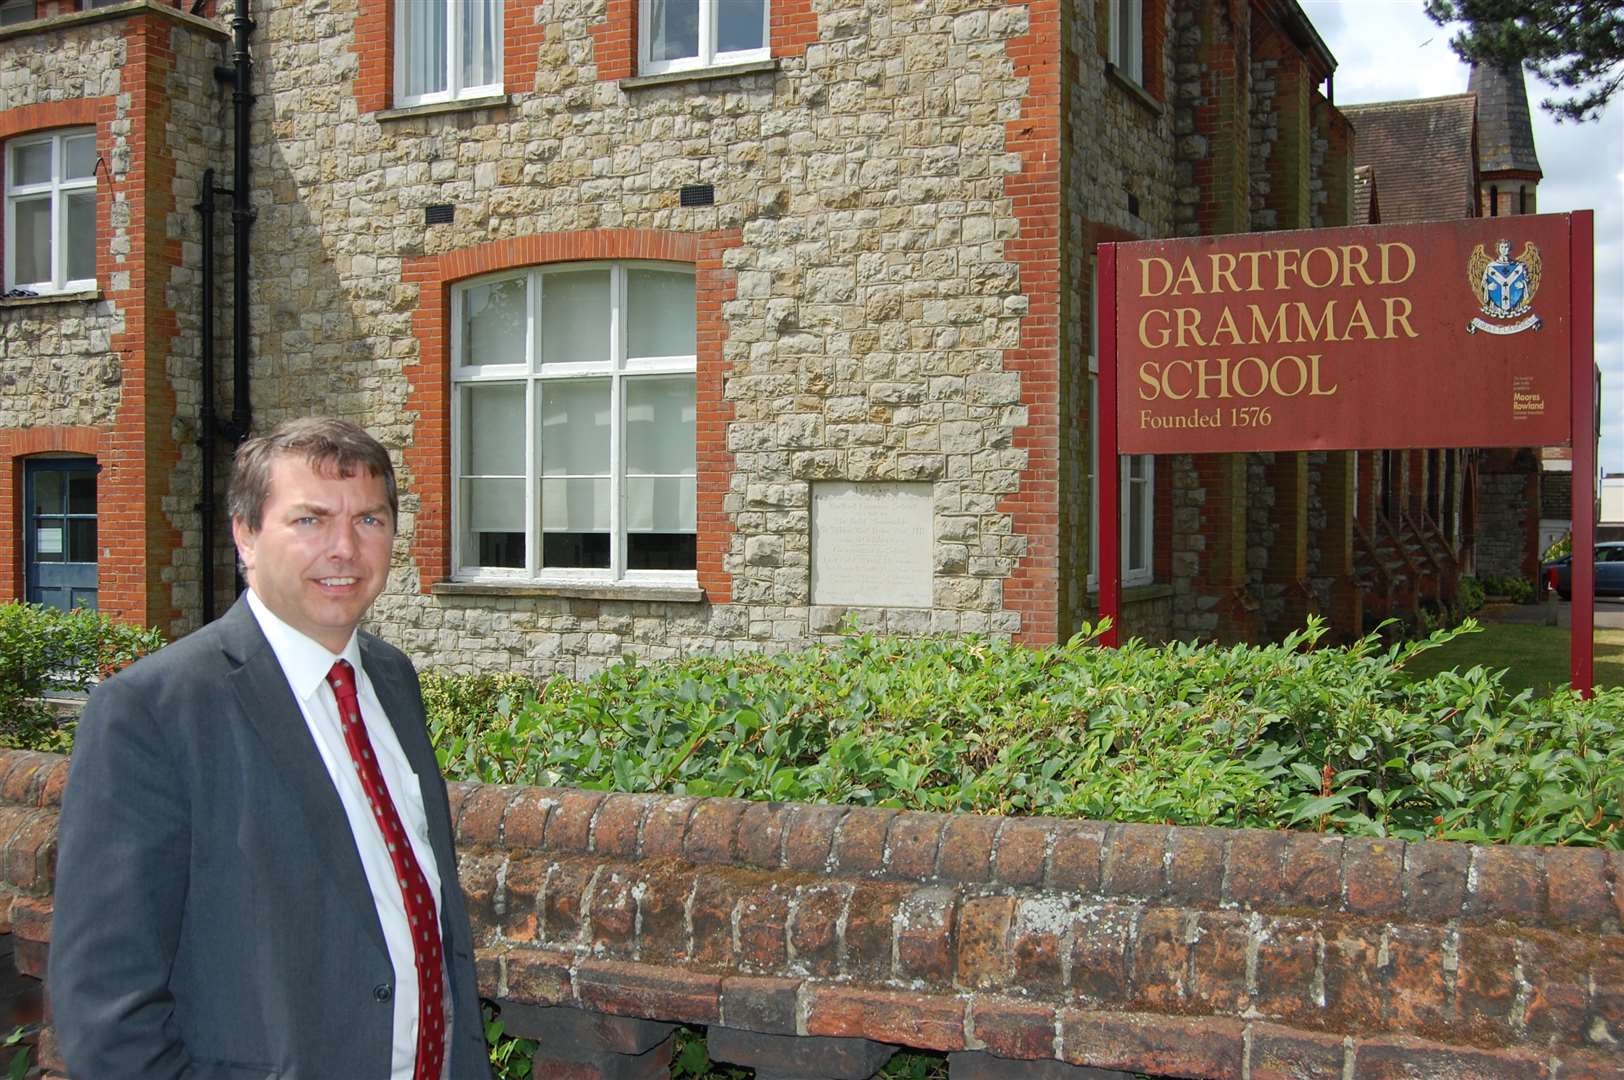 Dartford MP Gareth Johnson wants to see the law changed to allow for new grammar schools to be built both in his constituency and across the country.